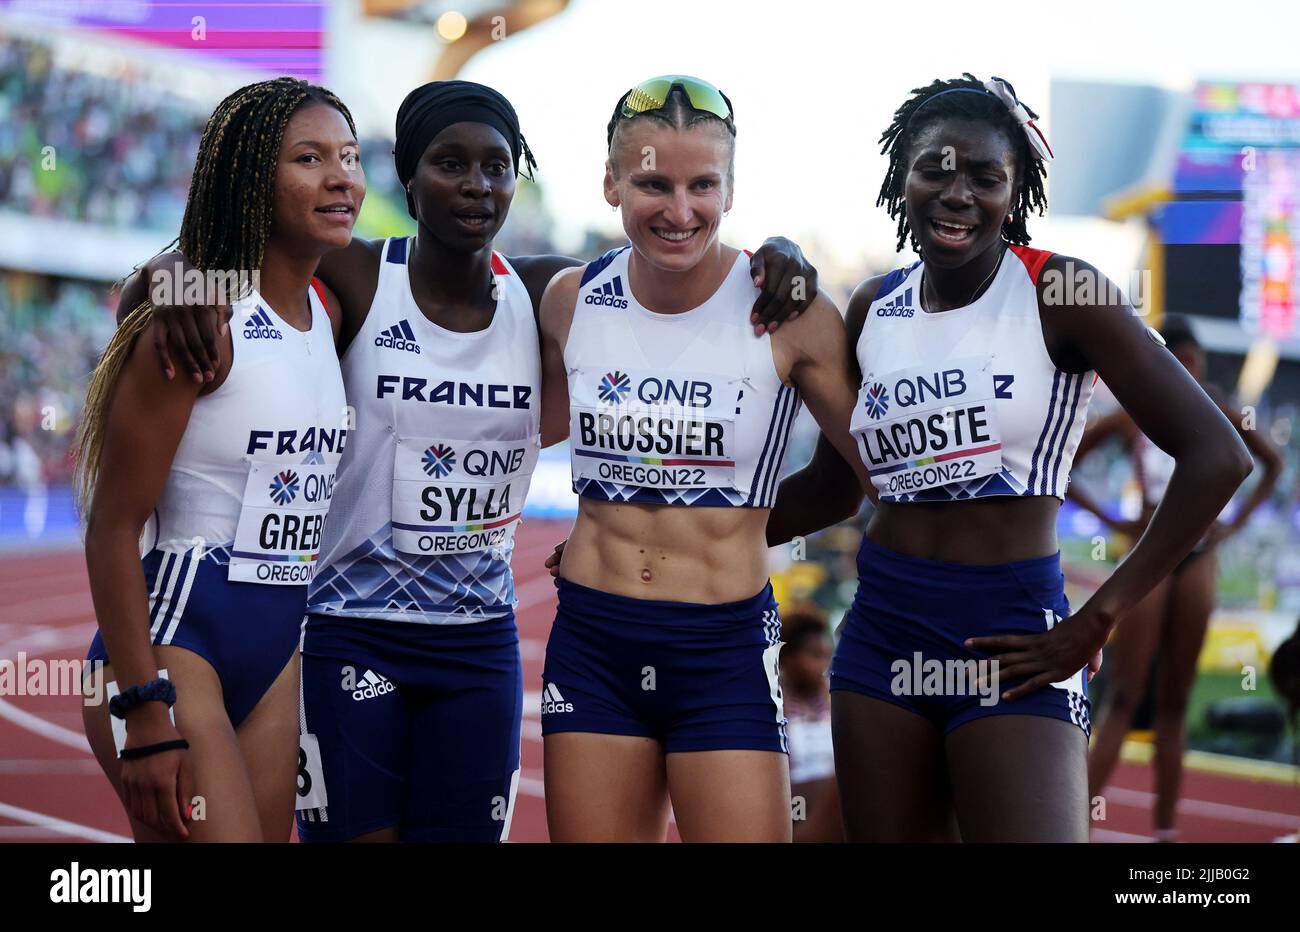 Athletics - World Athletics Championships - Women's 4x400 Metres Relay - Final - Hayward Field, Eugene, Oregon, U.S. - July 24, 2022 France's Sounkamba Sylla, Shana Grebo, Amandine Brossier and Sokhna Lacoste pose after finishing the women's 4x400 metres final in fifth place REUTERS/Lucy Nicholson Stock Photo